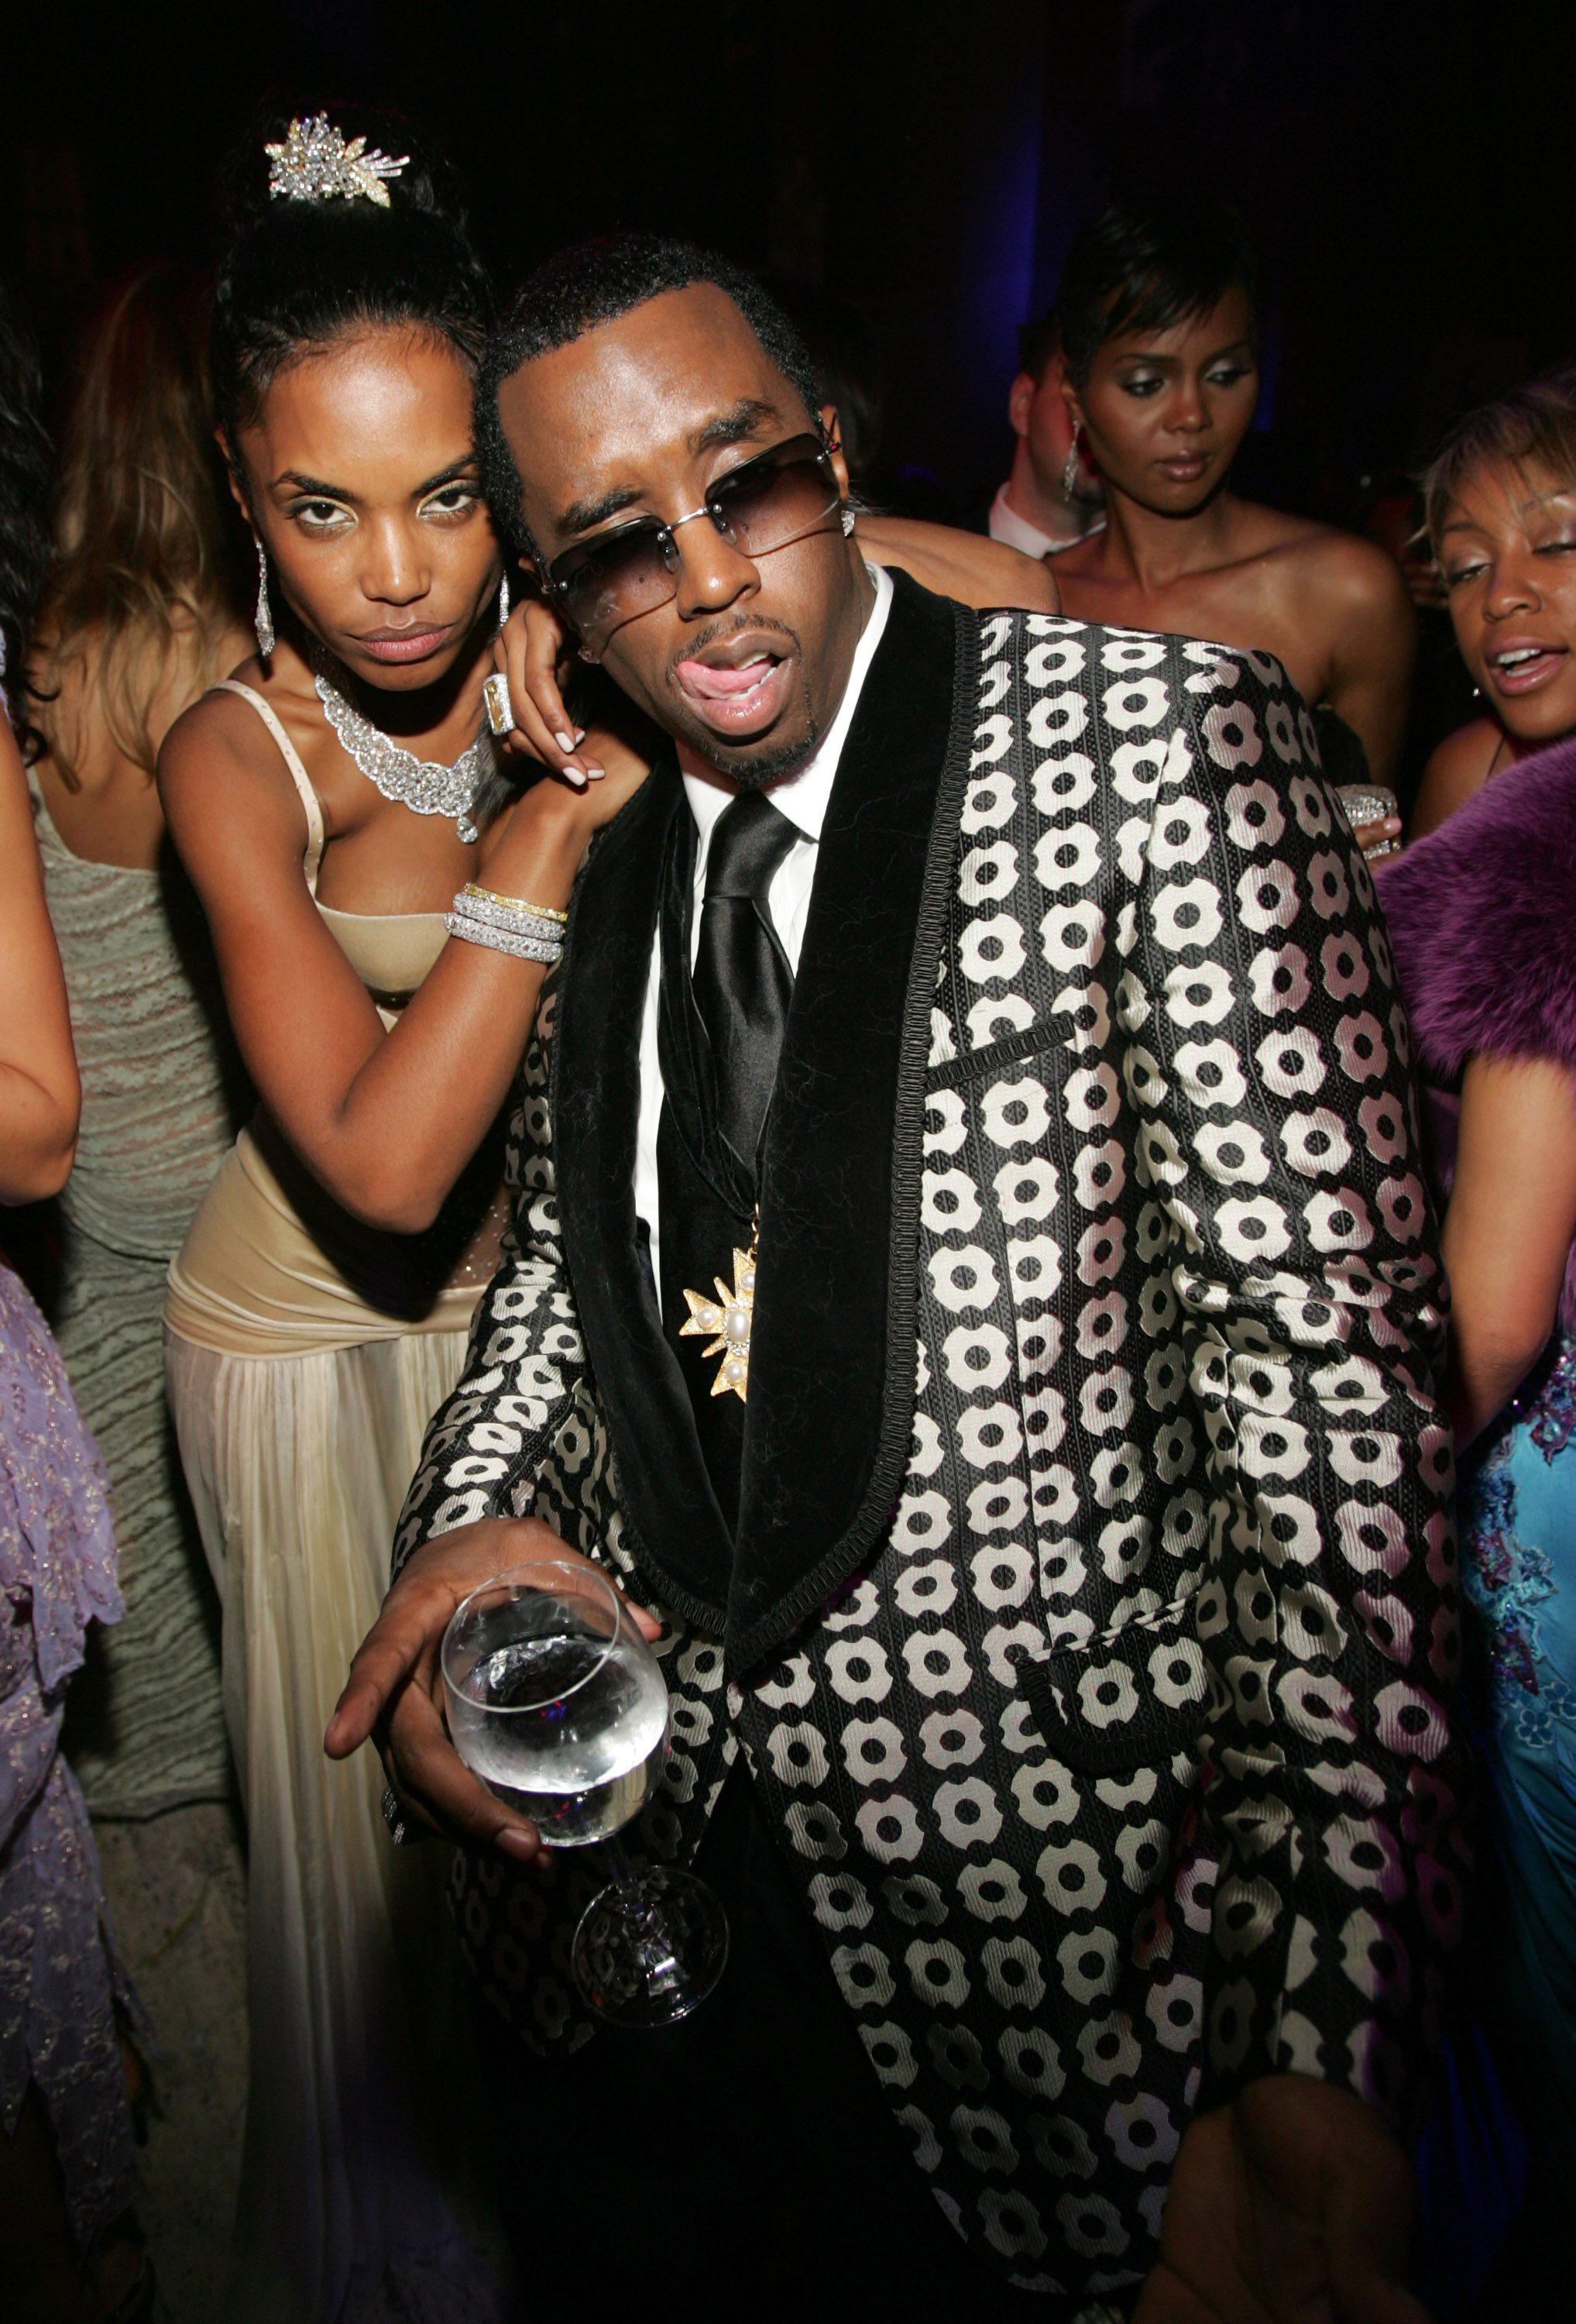 Royal Birthday Ball for Sean 'P. Diddy' Combs - Inside